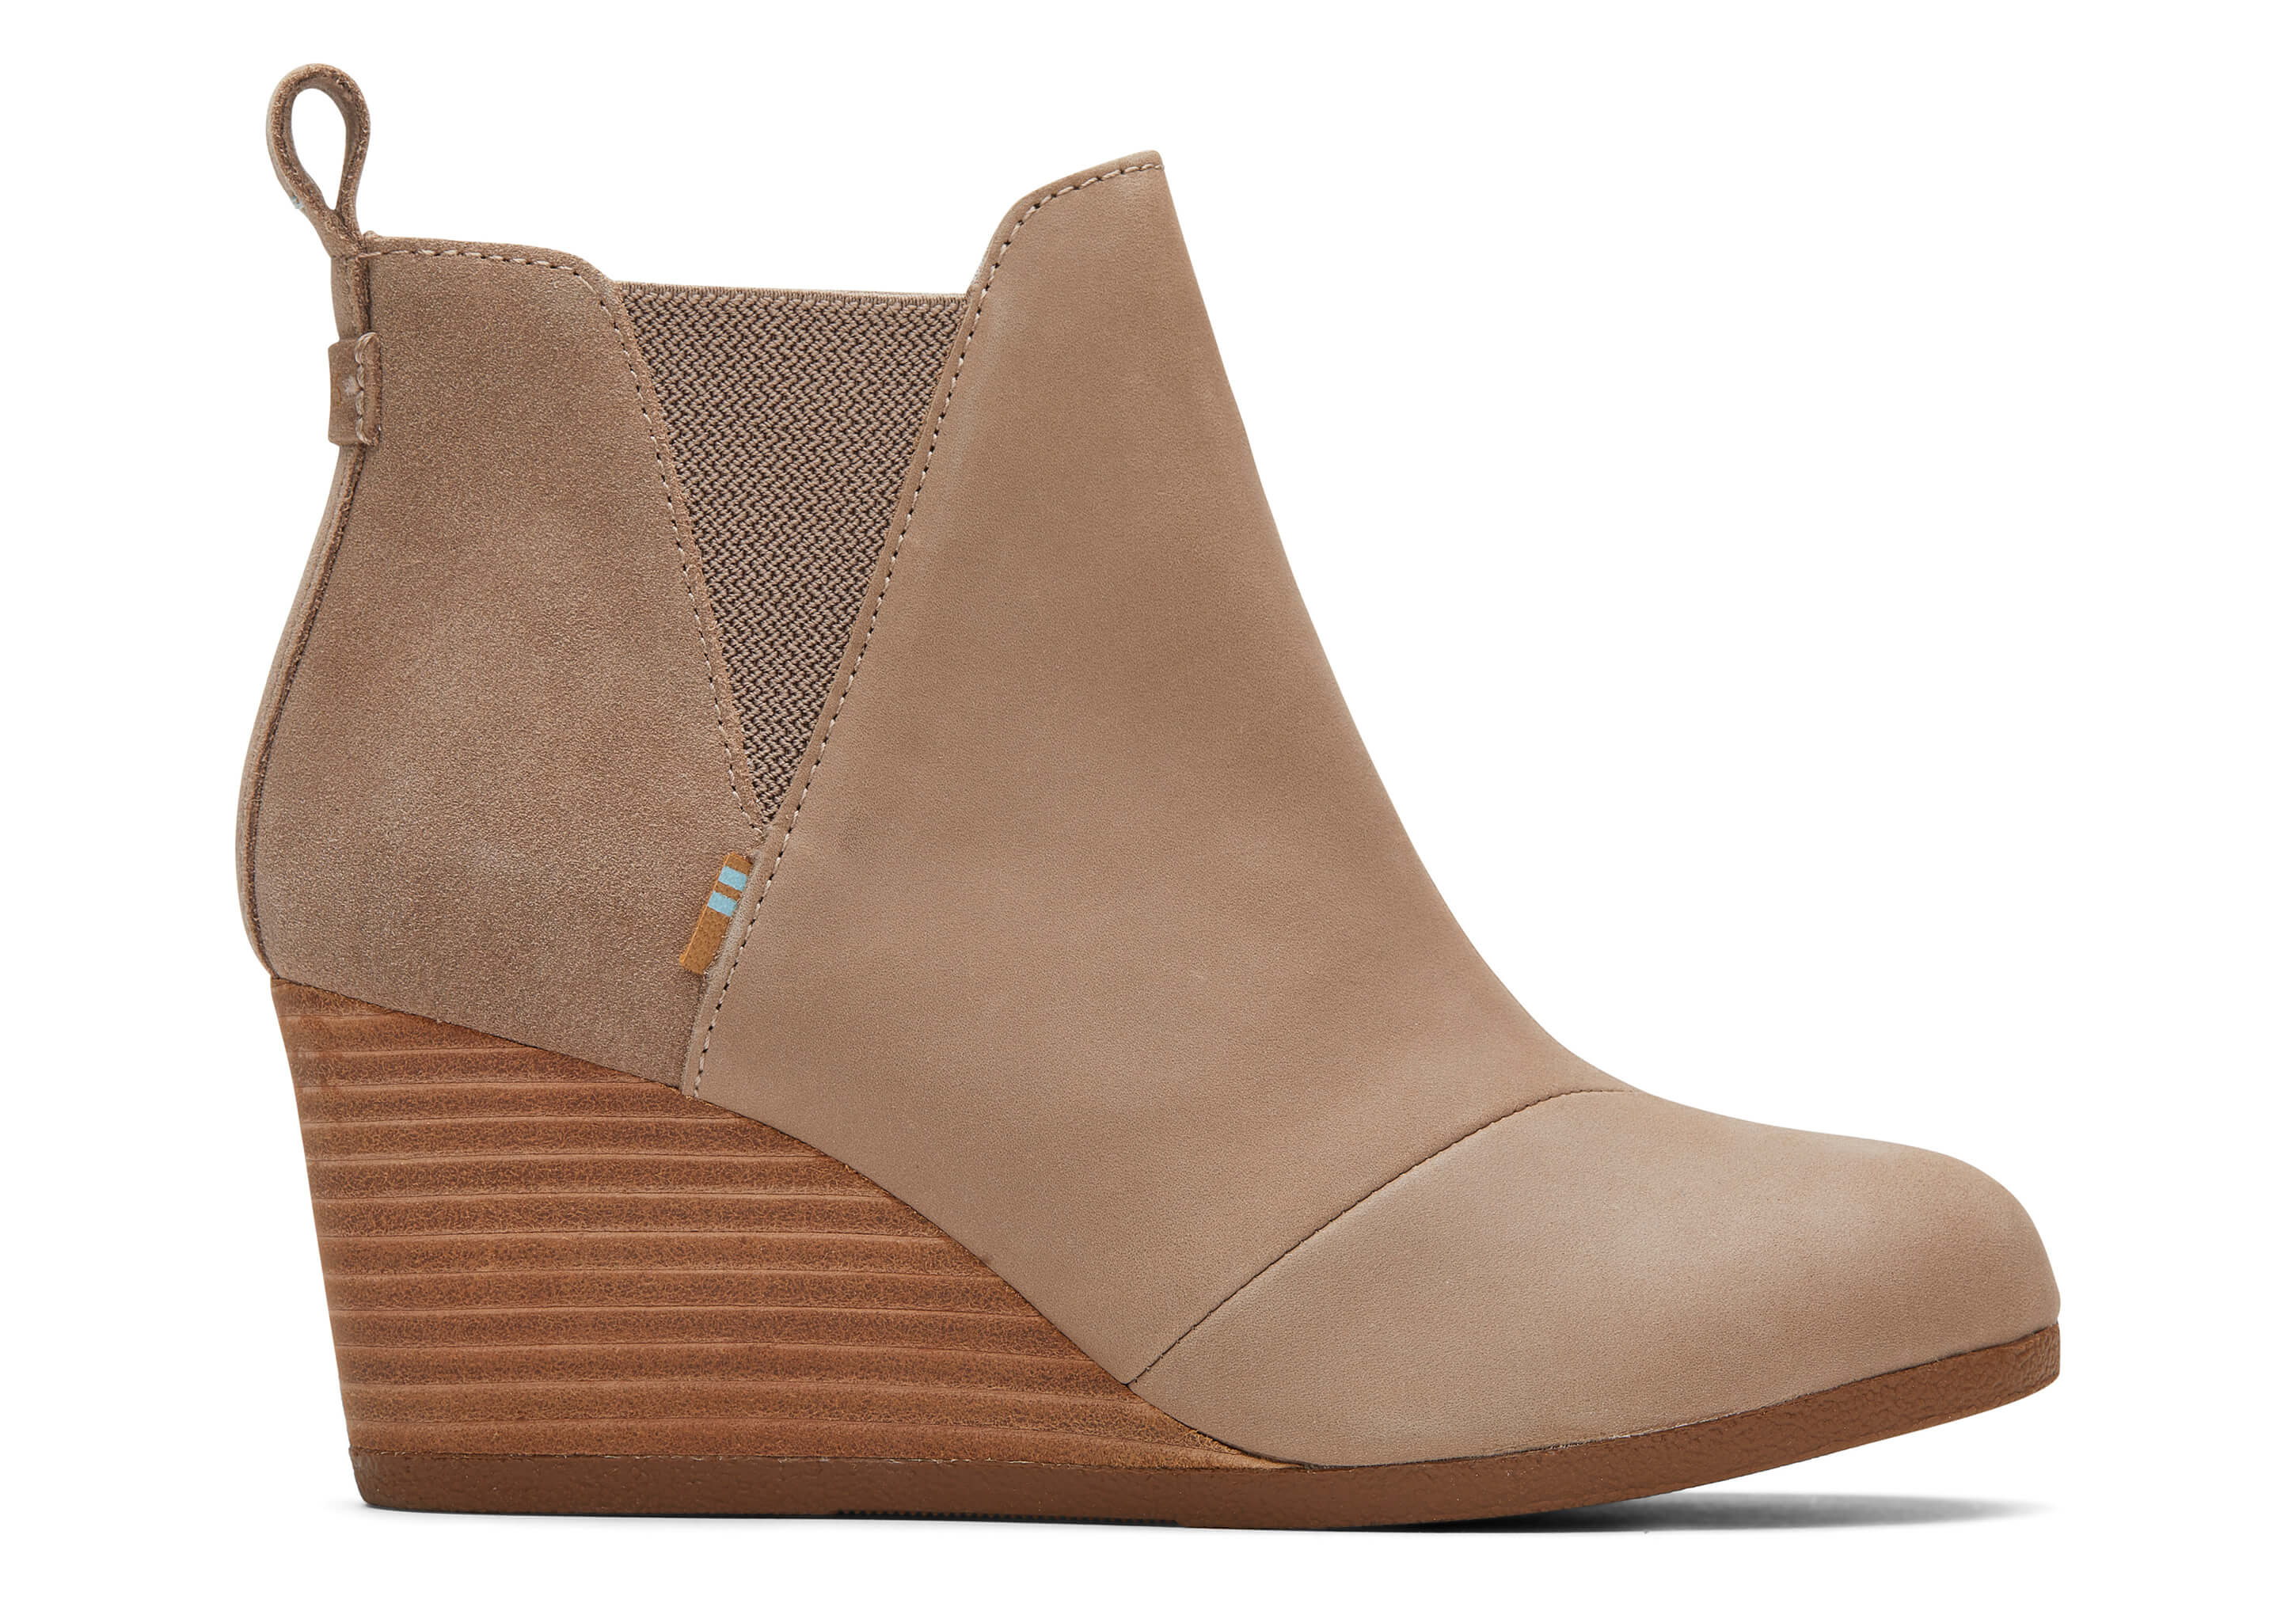 toms taupe booties